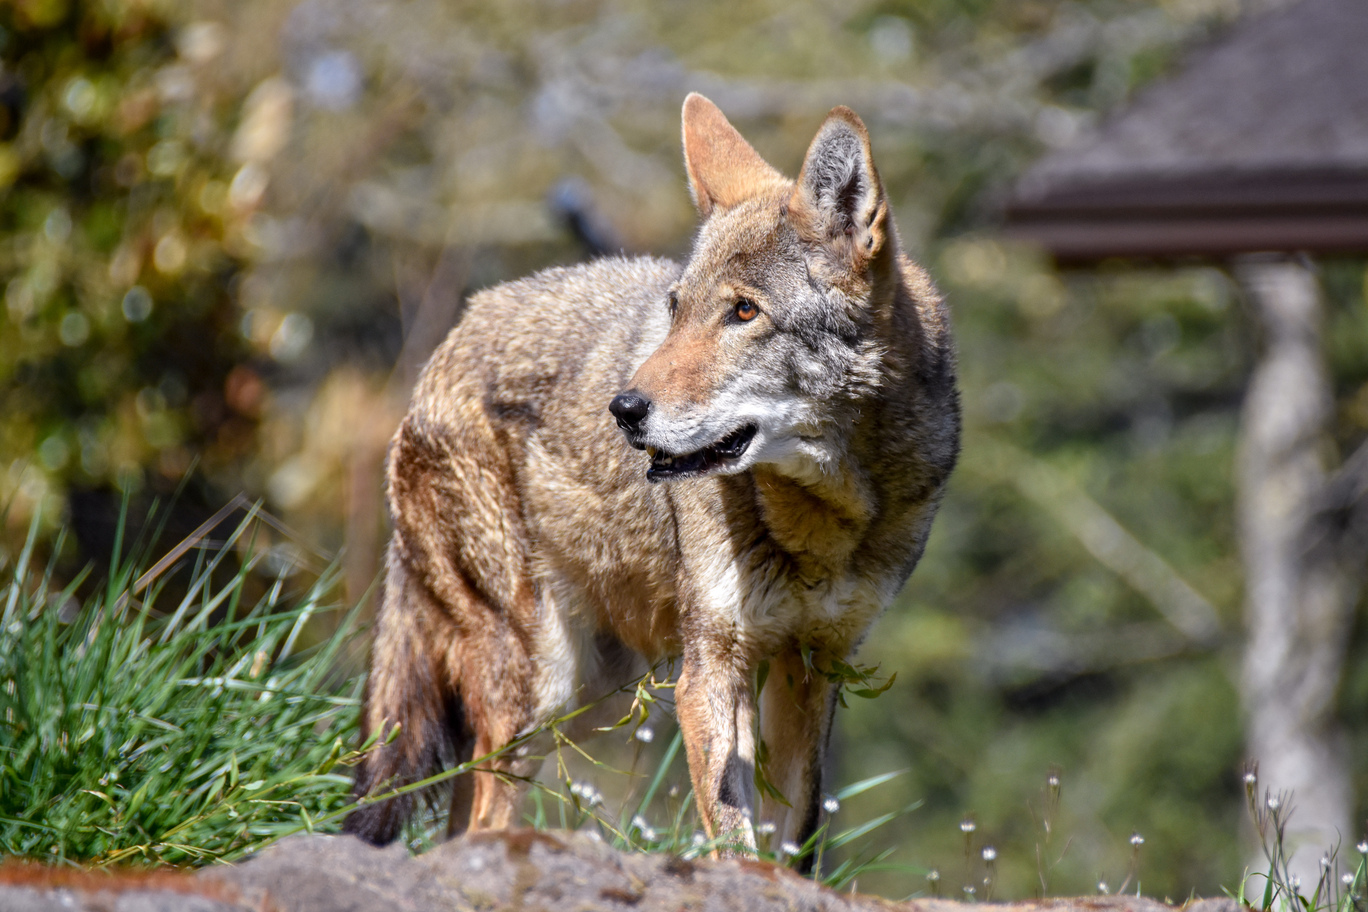 A red wolf looks to the left while standing in a grassy area.